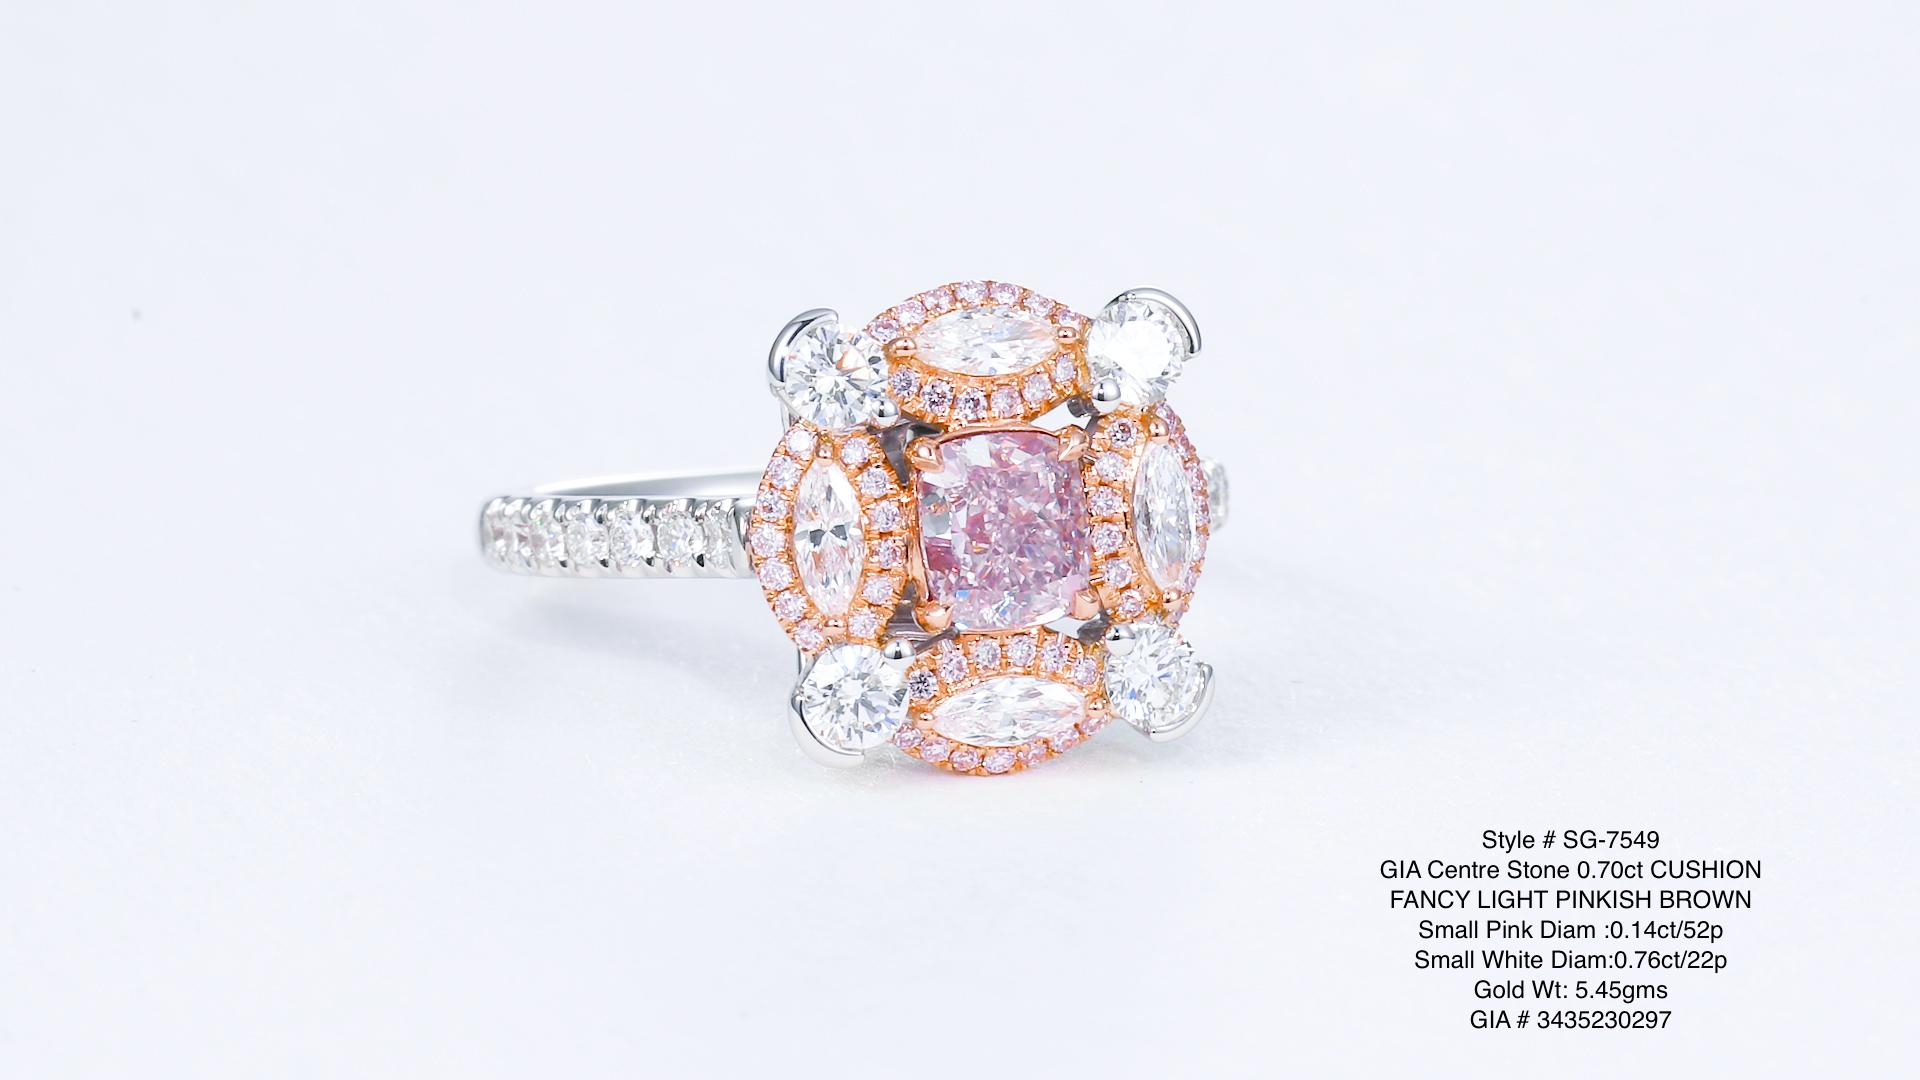 A captivating treasure: a 0.70 ct natural fancy pink diamond, delicately mounted on an 18kt gold ring. Adorned with enchanting white and pink diamonds, this rare gem exudes elegance and charm. The allure of fancy color diamonds lies in their